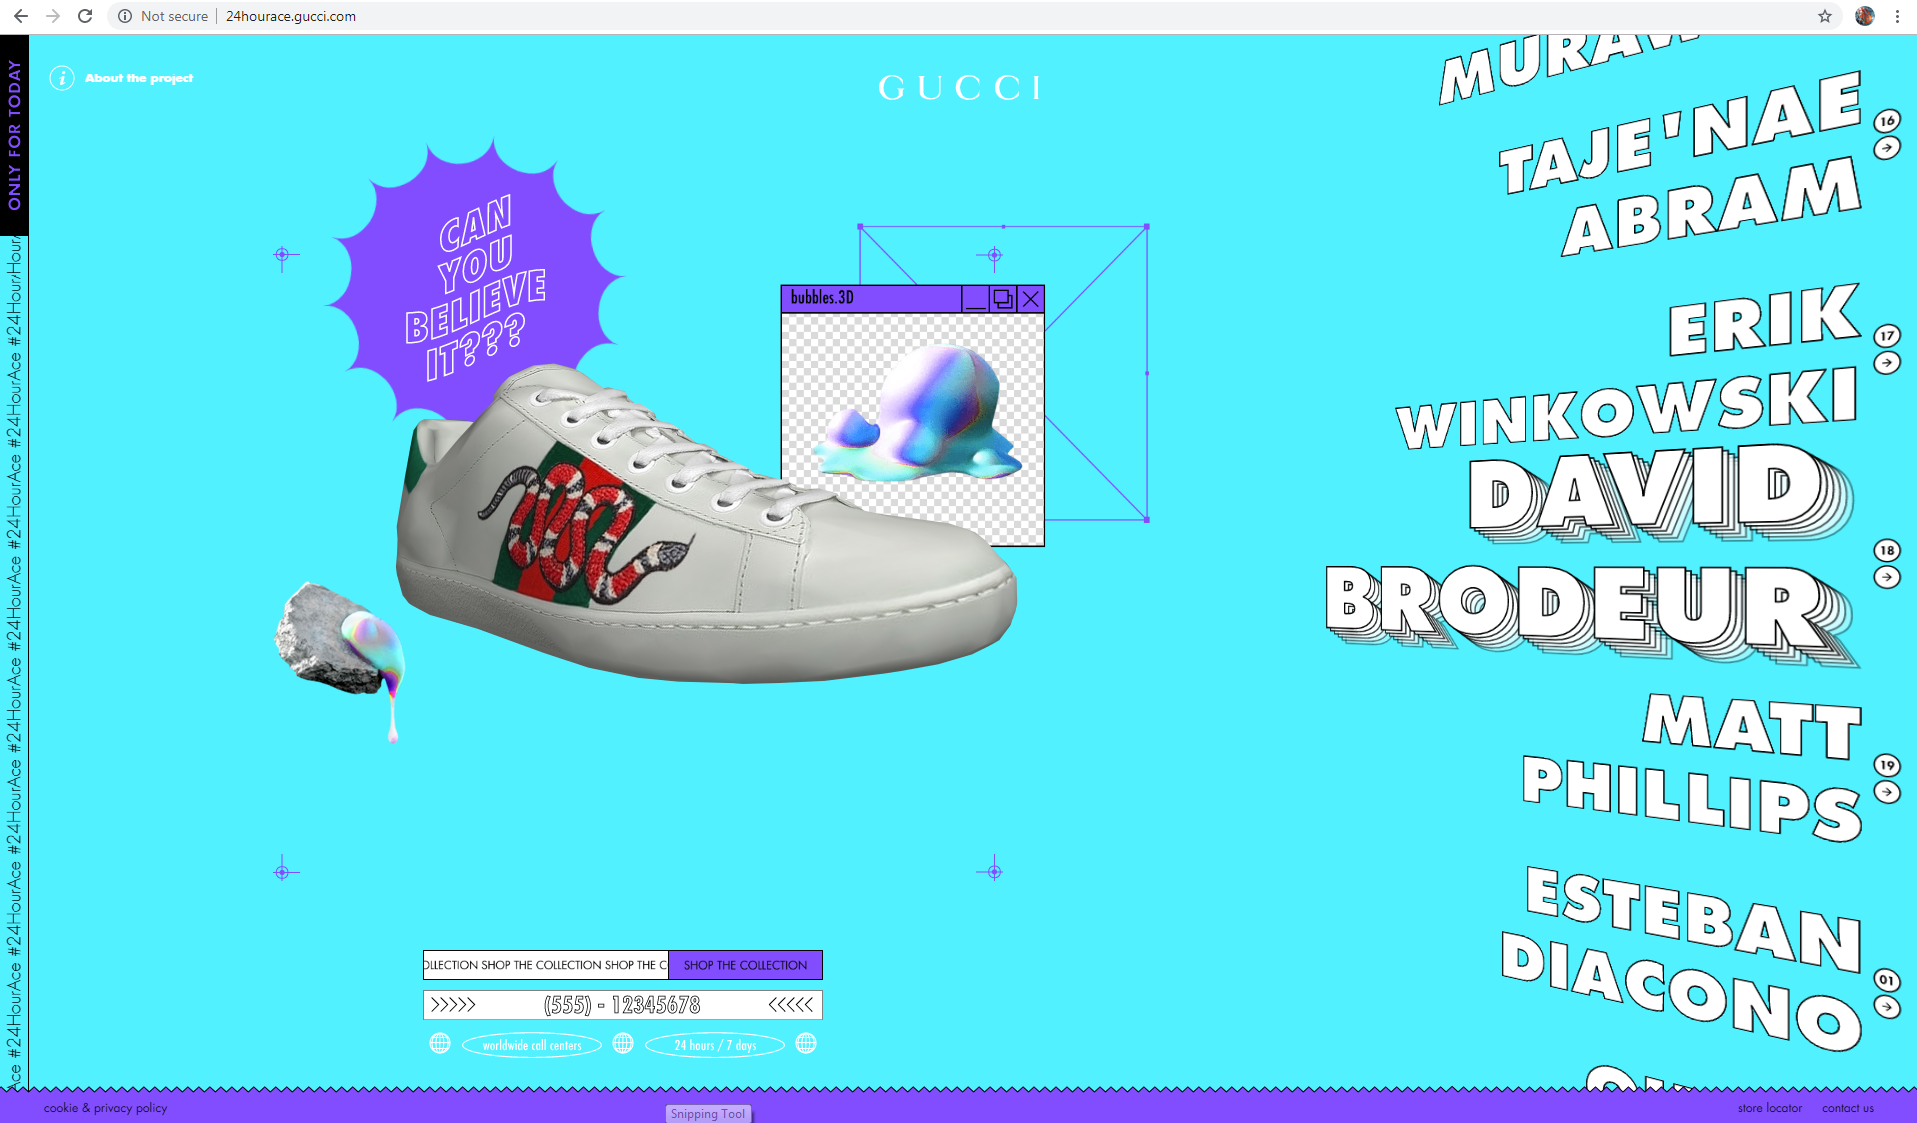 gucci_site_01.PNG